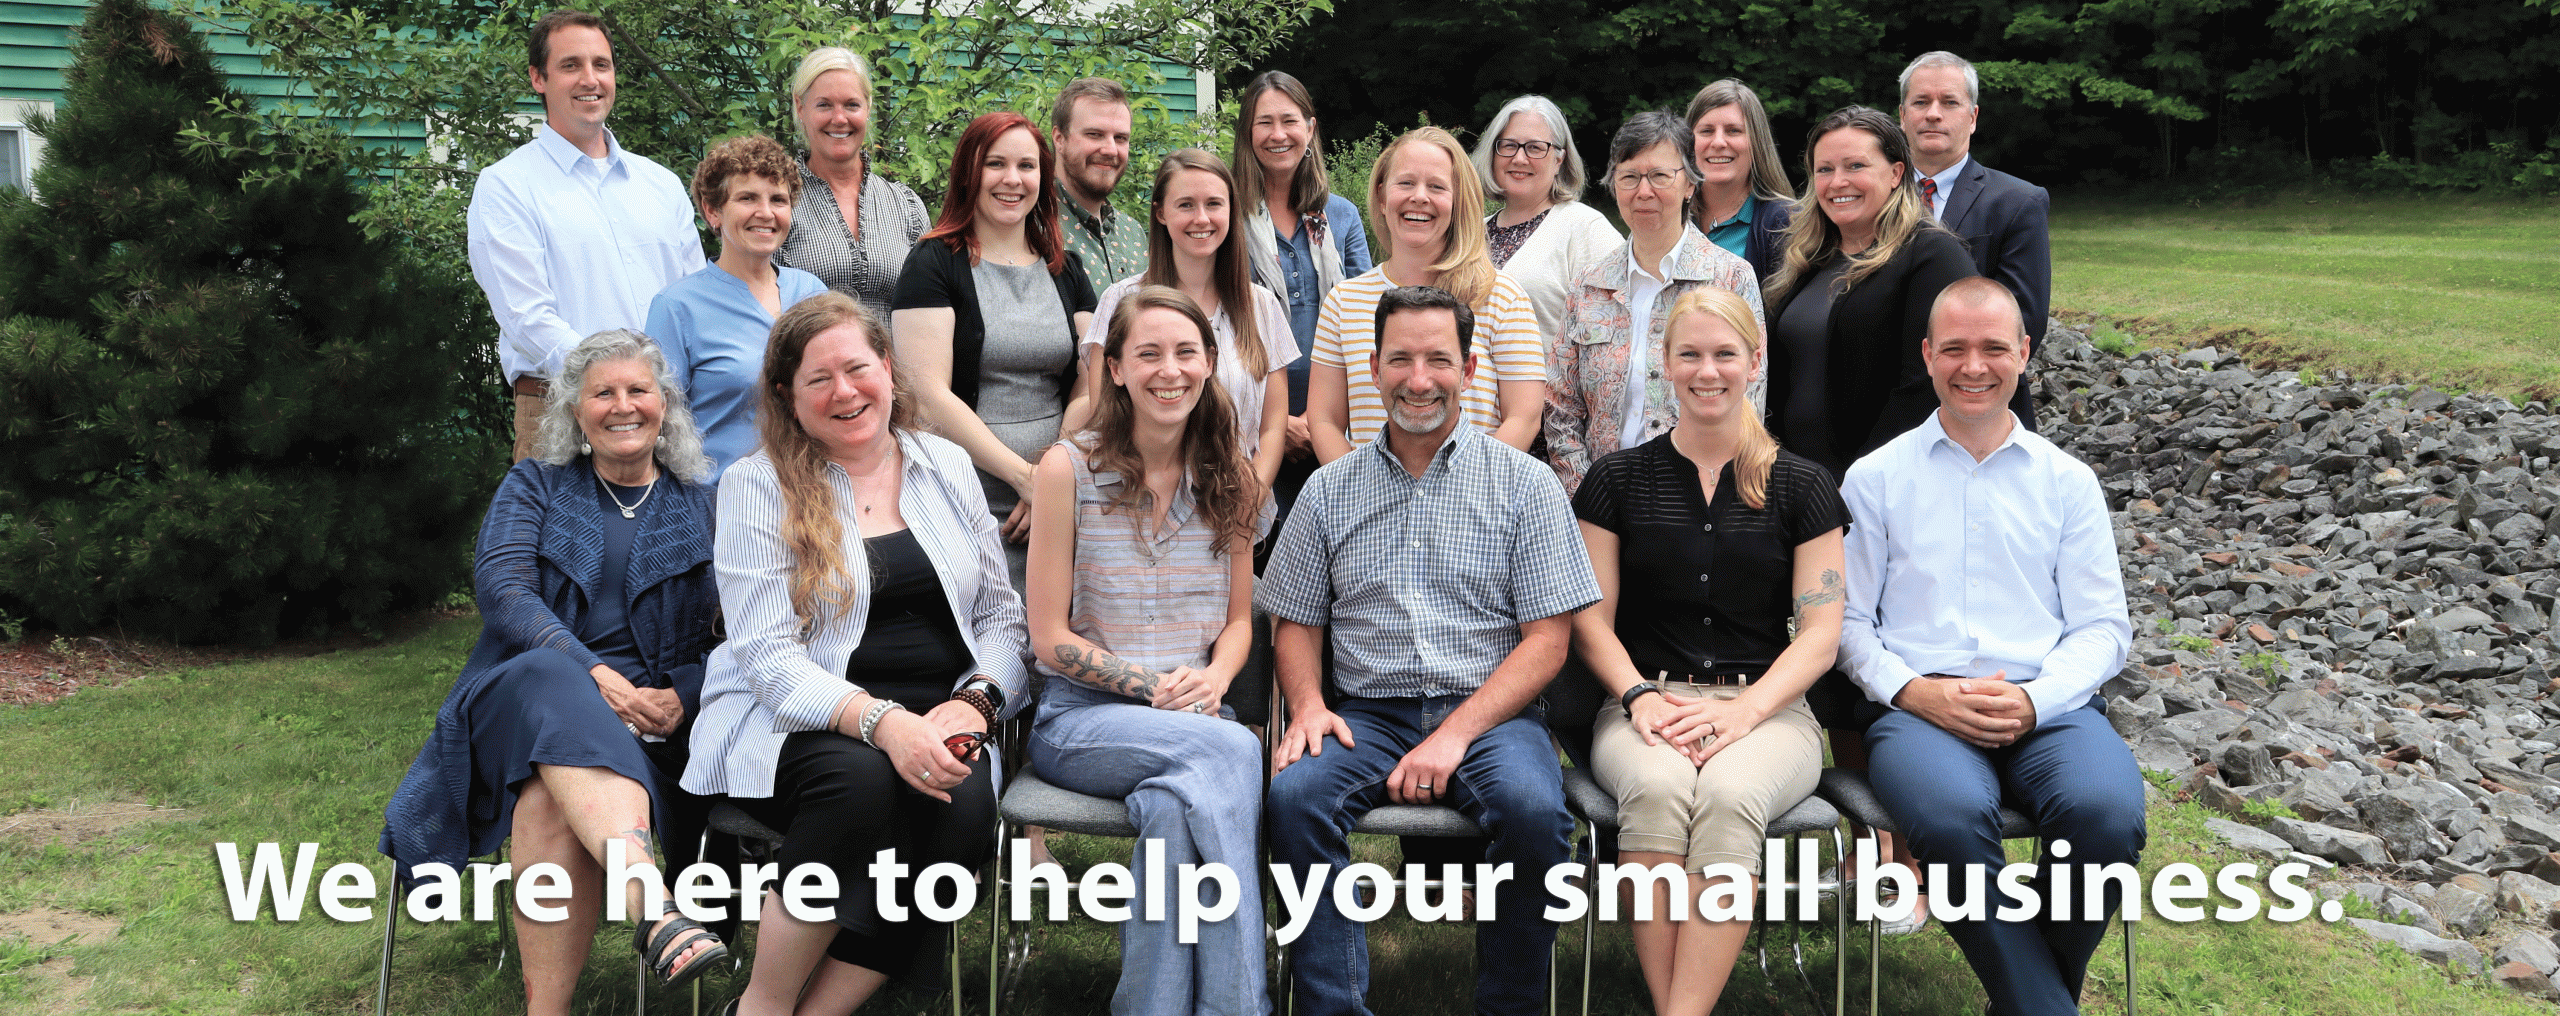 Maine SBDC Group Picture - we are here to help your small business.